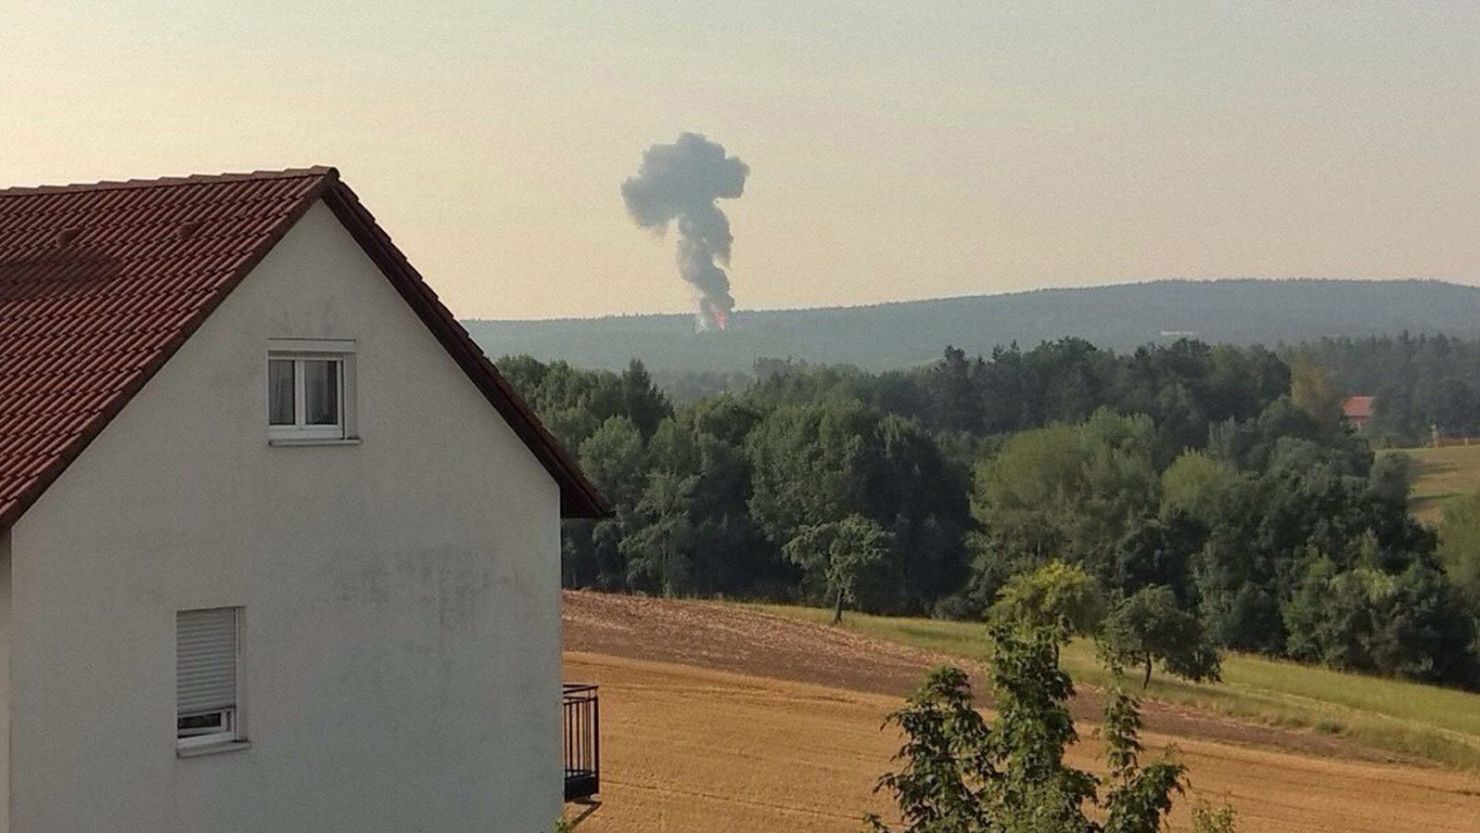 Smoke is visible in the distance where a U.S. F-16 crashed Tuesday in Germany's Bavaria region.